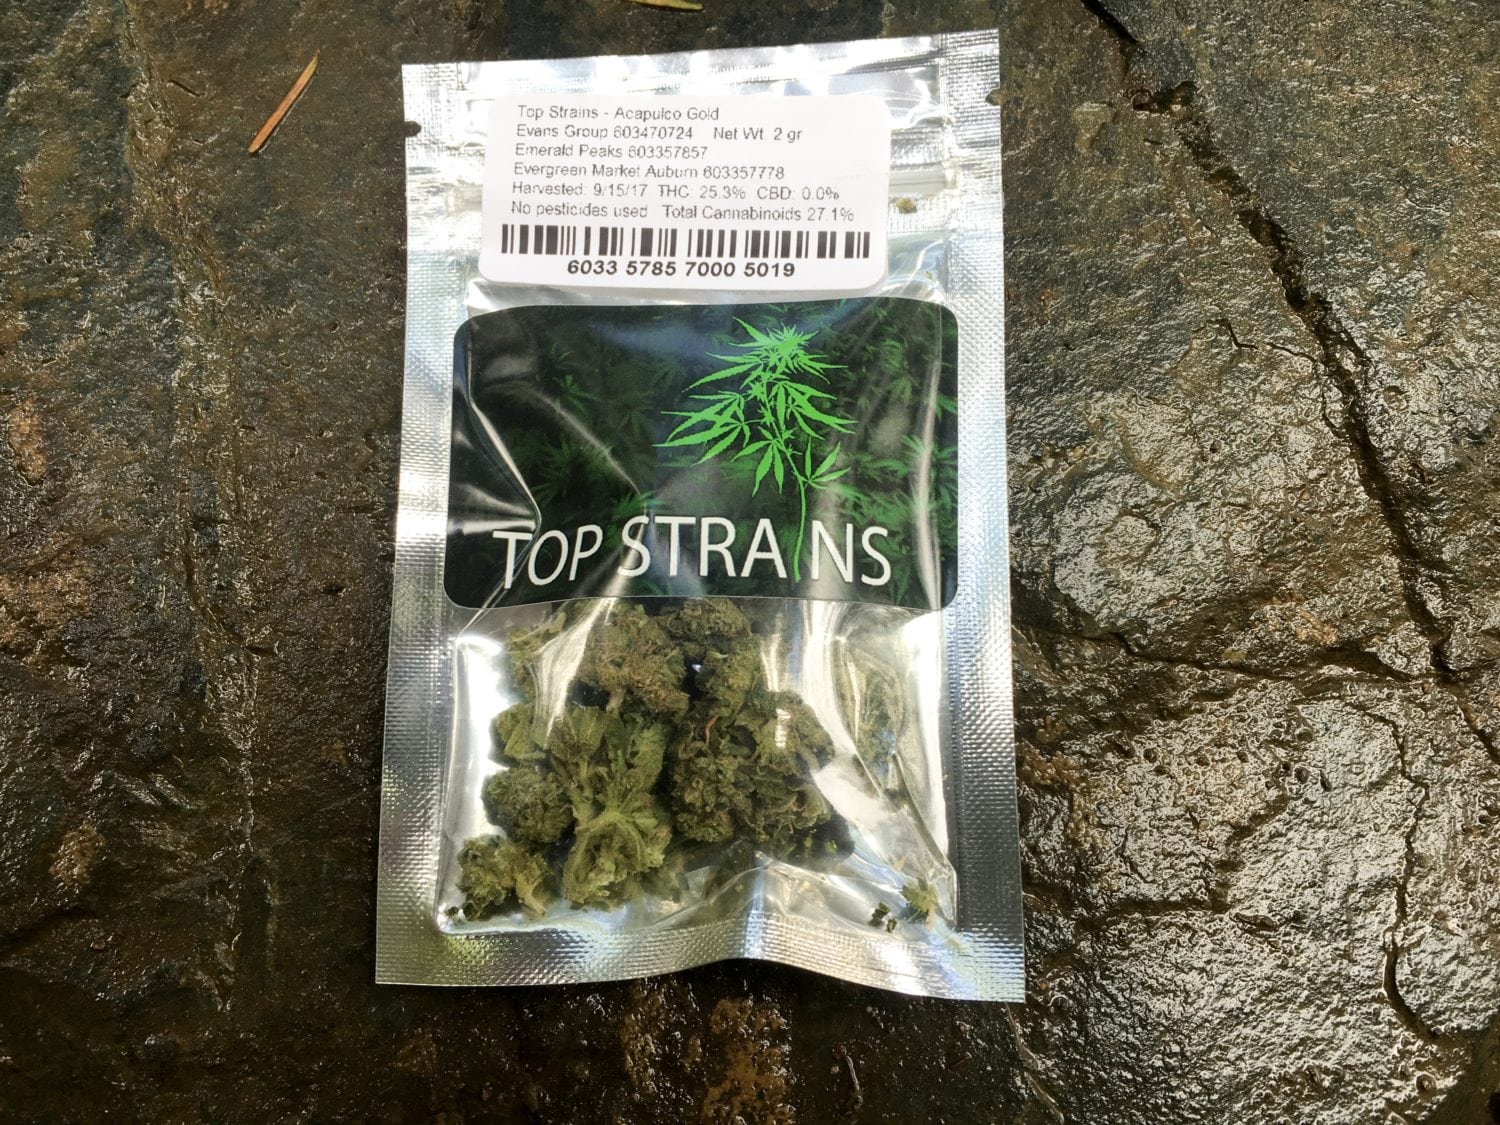 A Real Review of The Acapulco Gold Strain From Top Strains